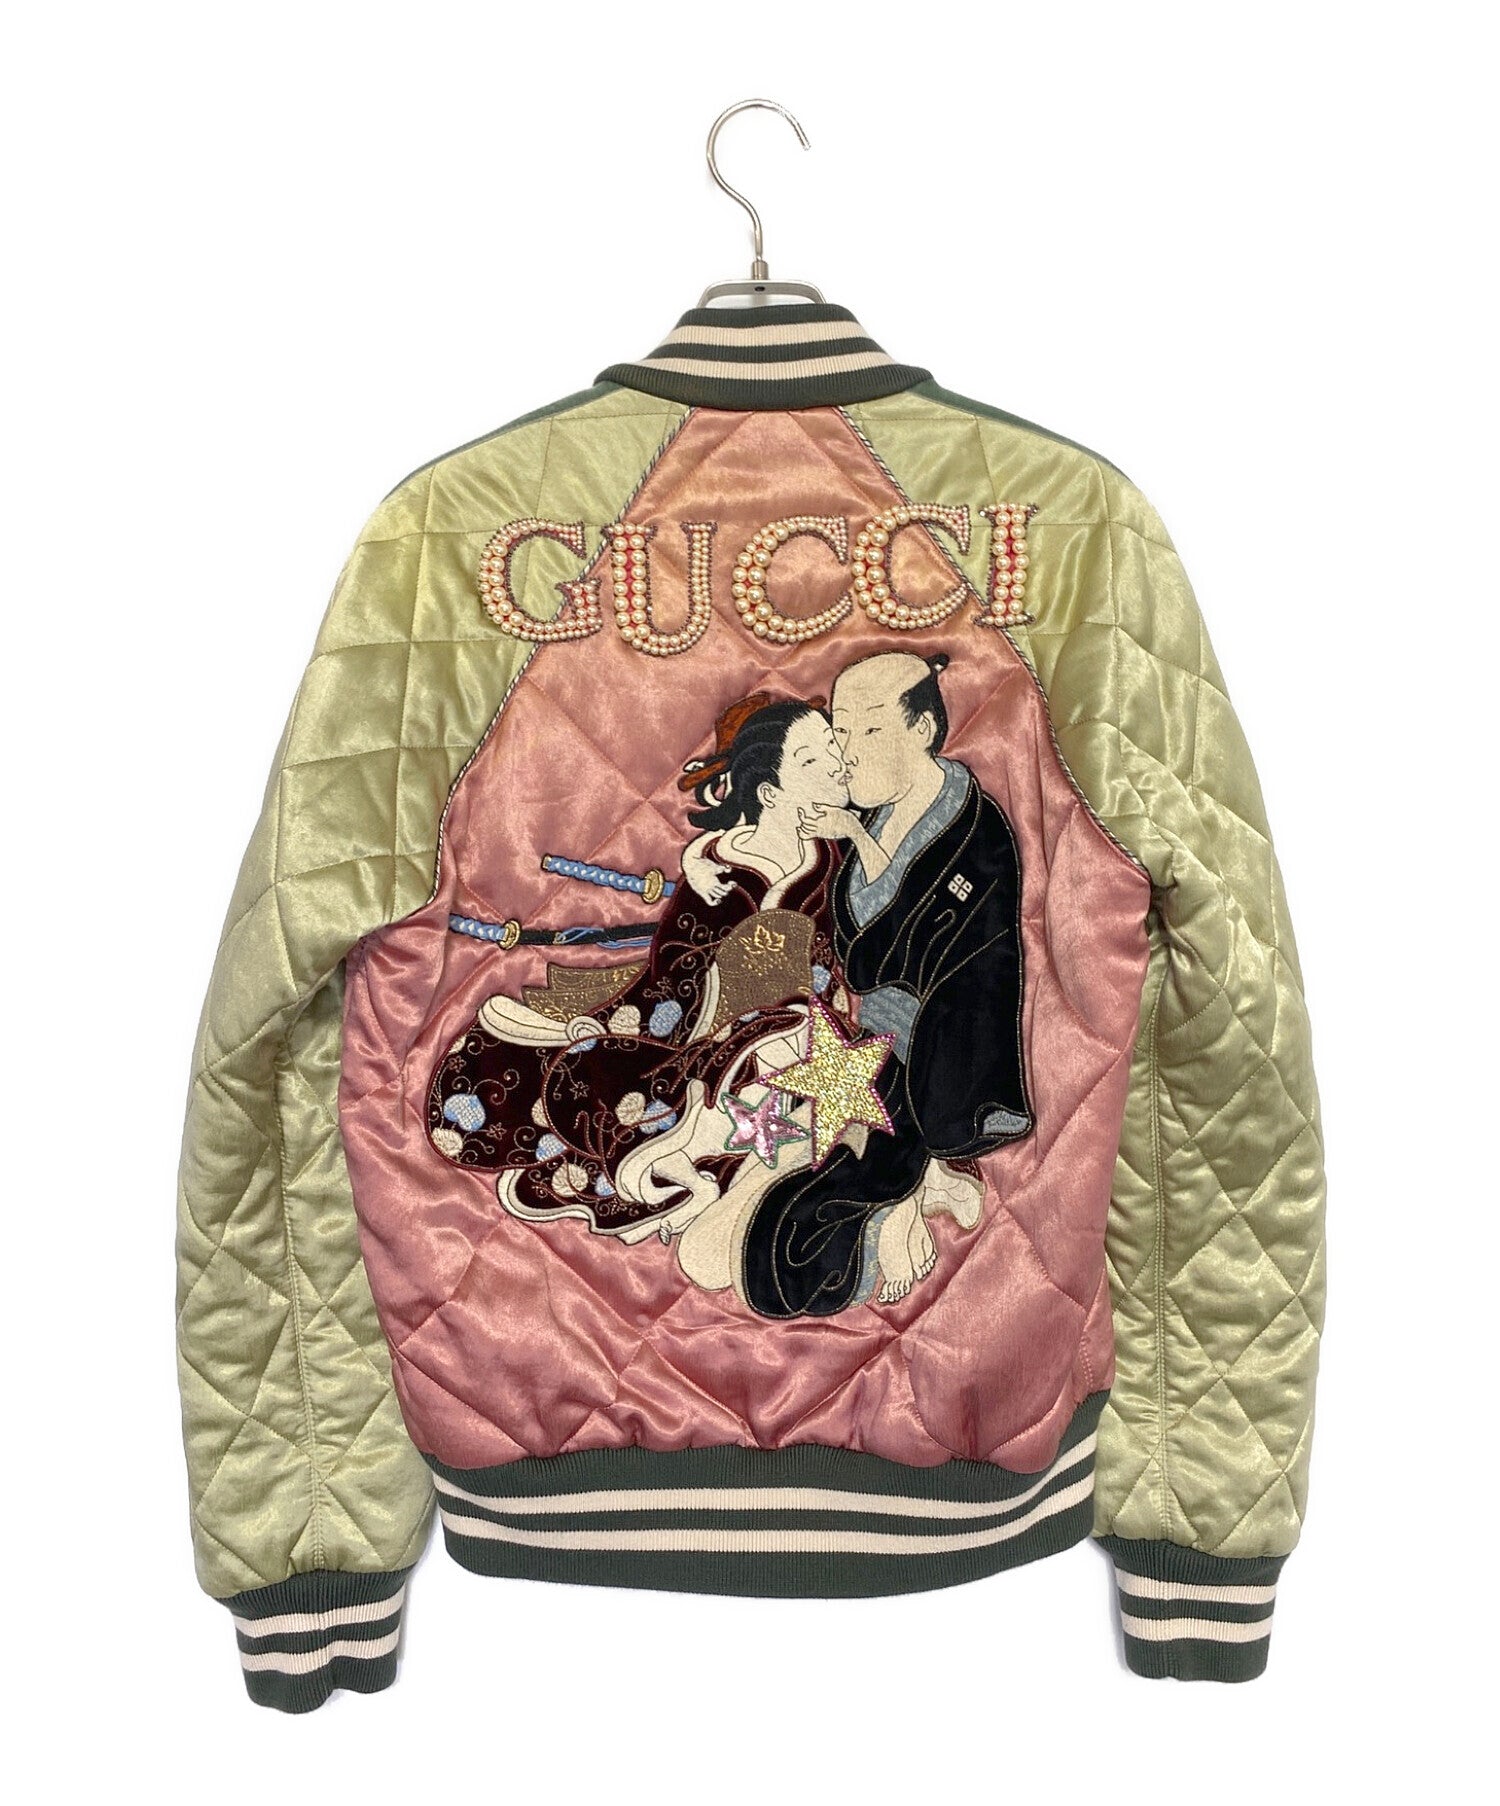 Gucci Green Velvet Embroidery Detail Bomber Jacket S Gucci